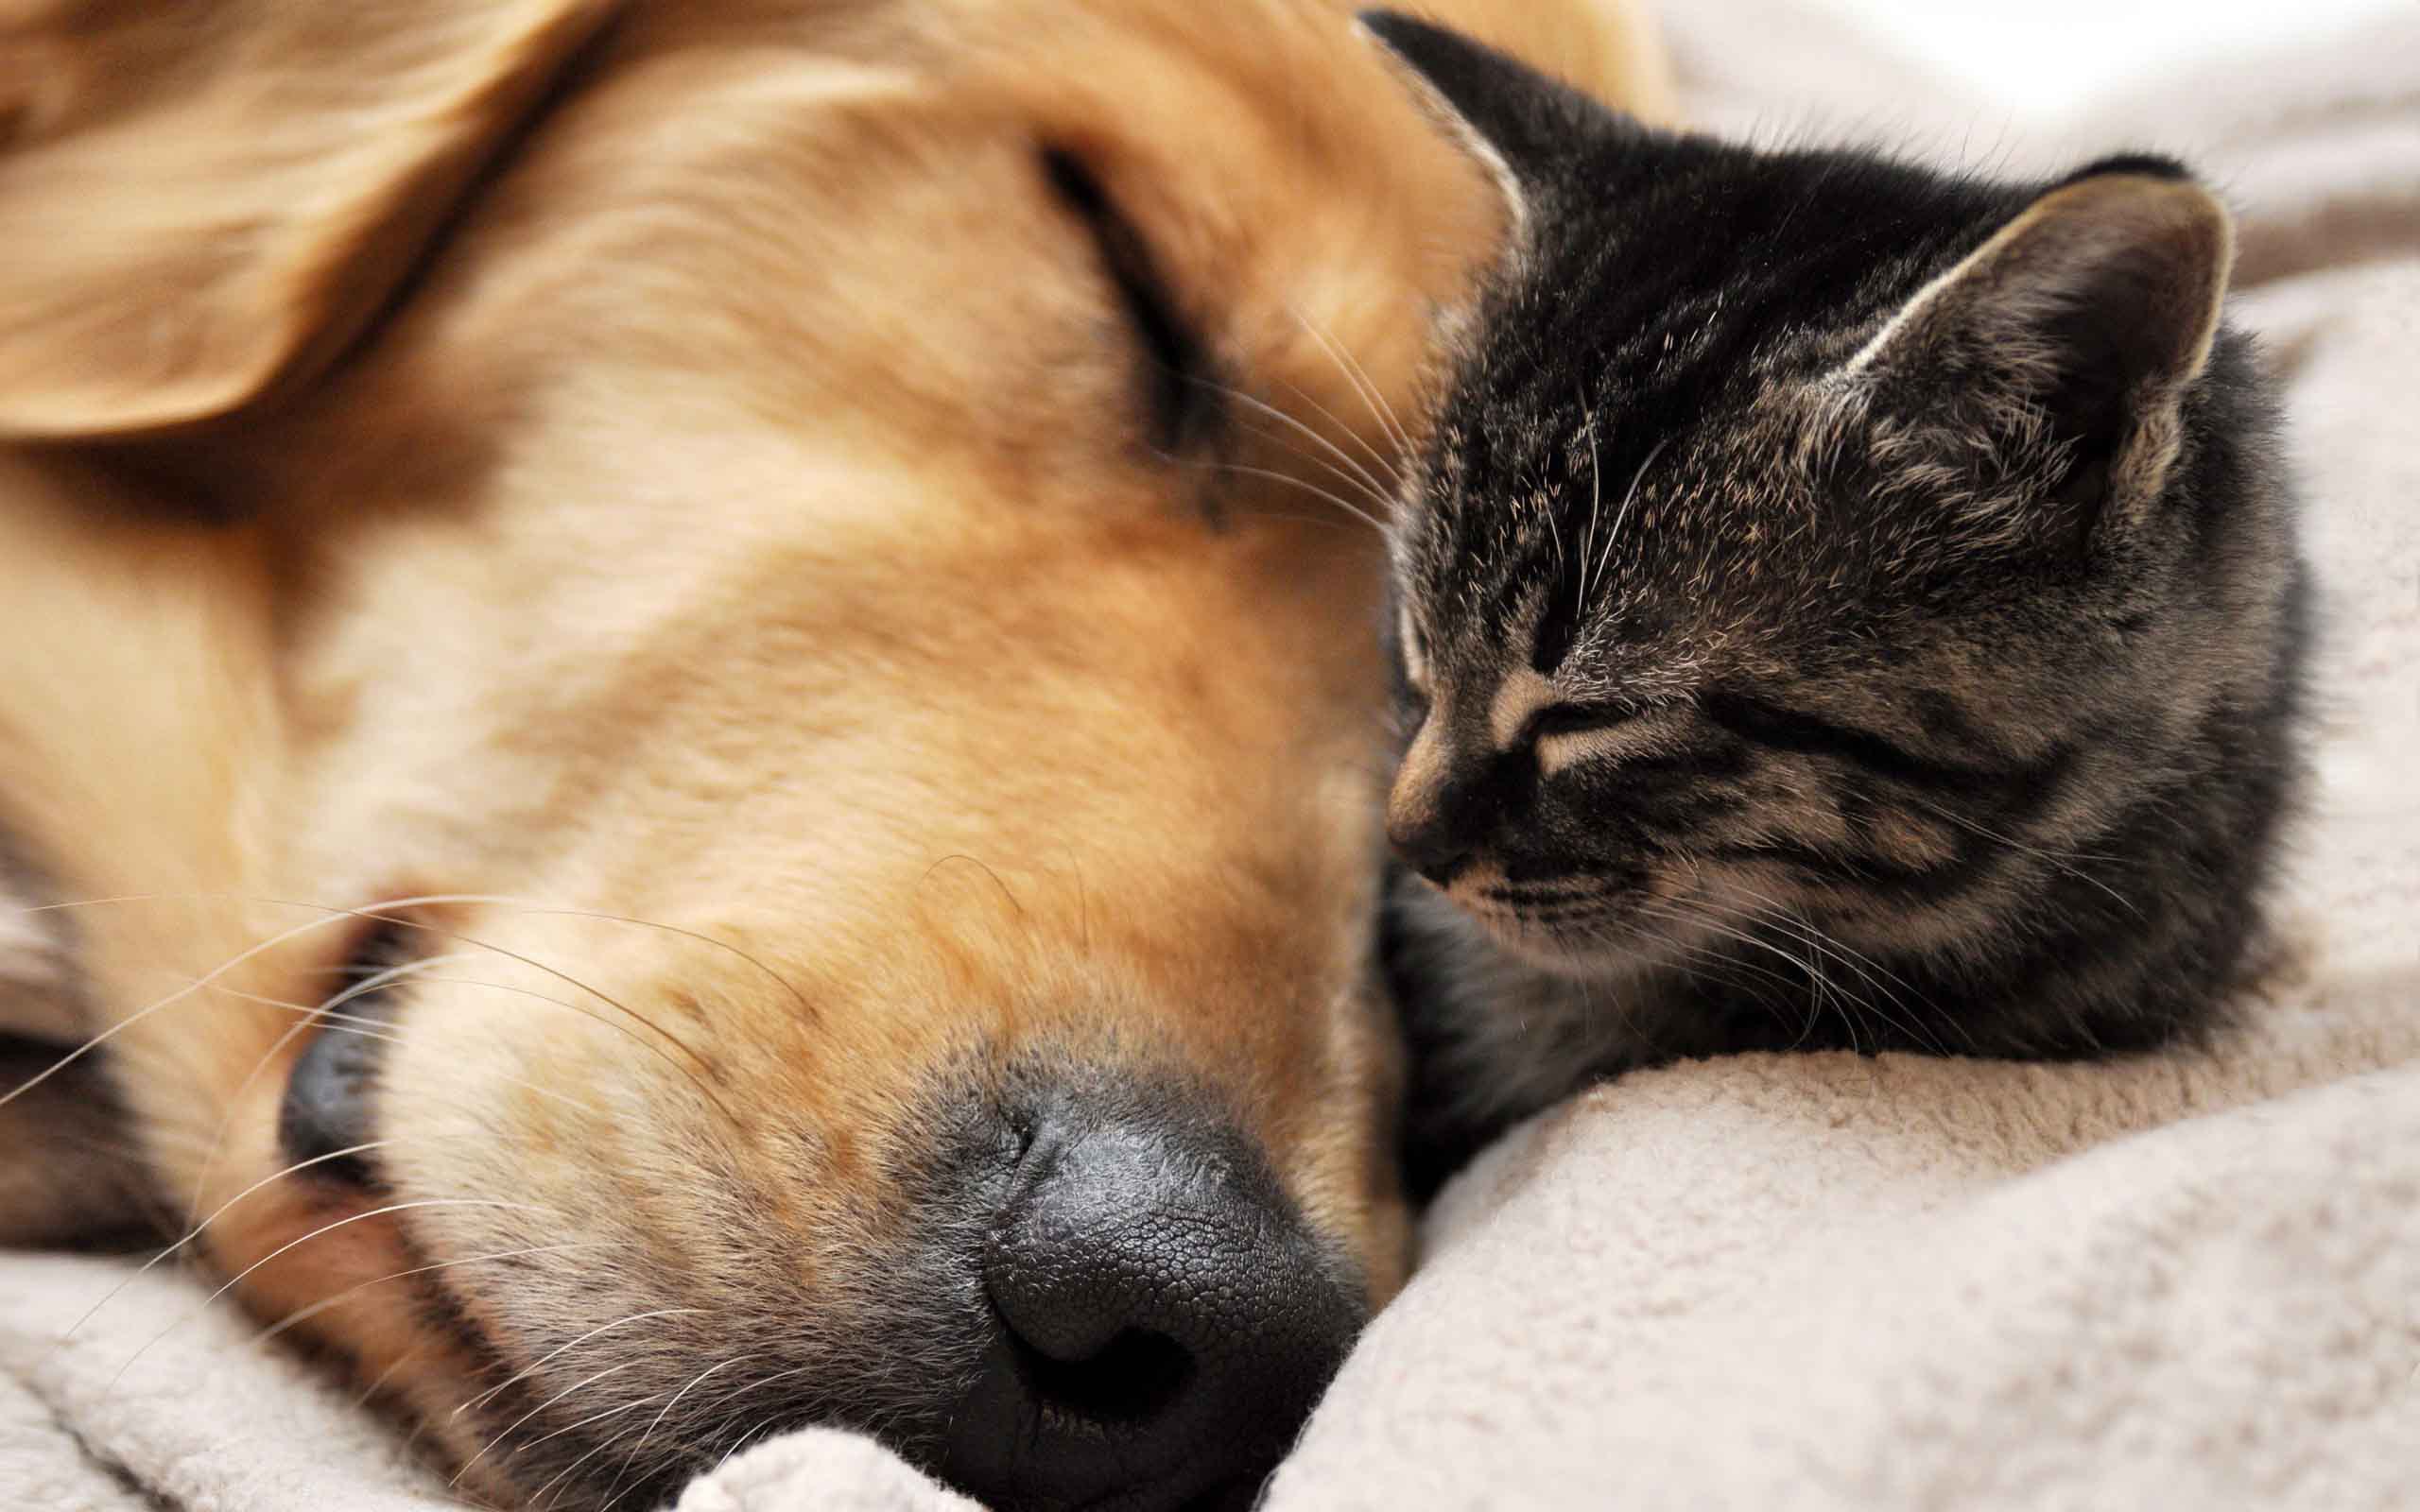 Cat And Dog Sleeping Wallpaper Image Pictures